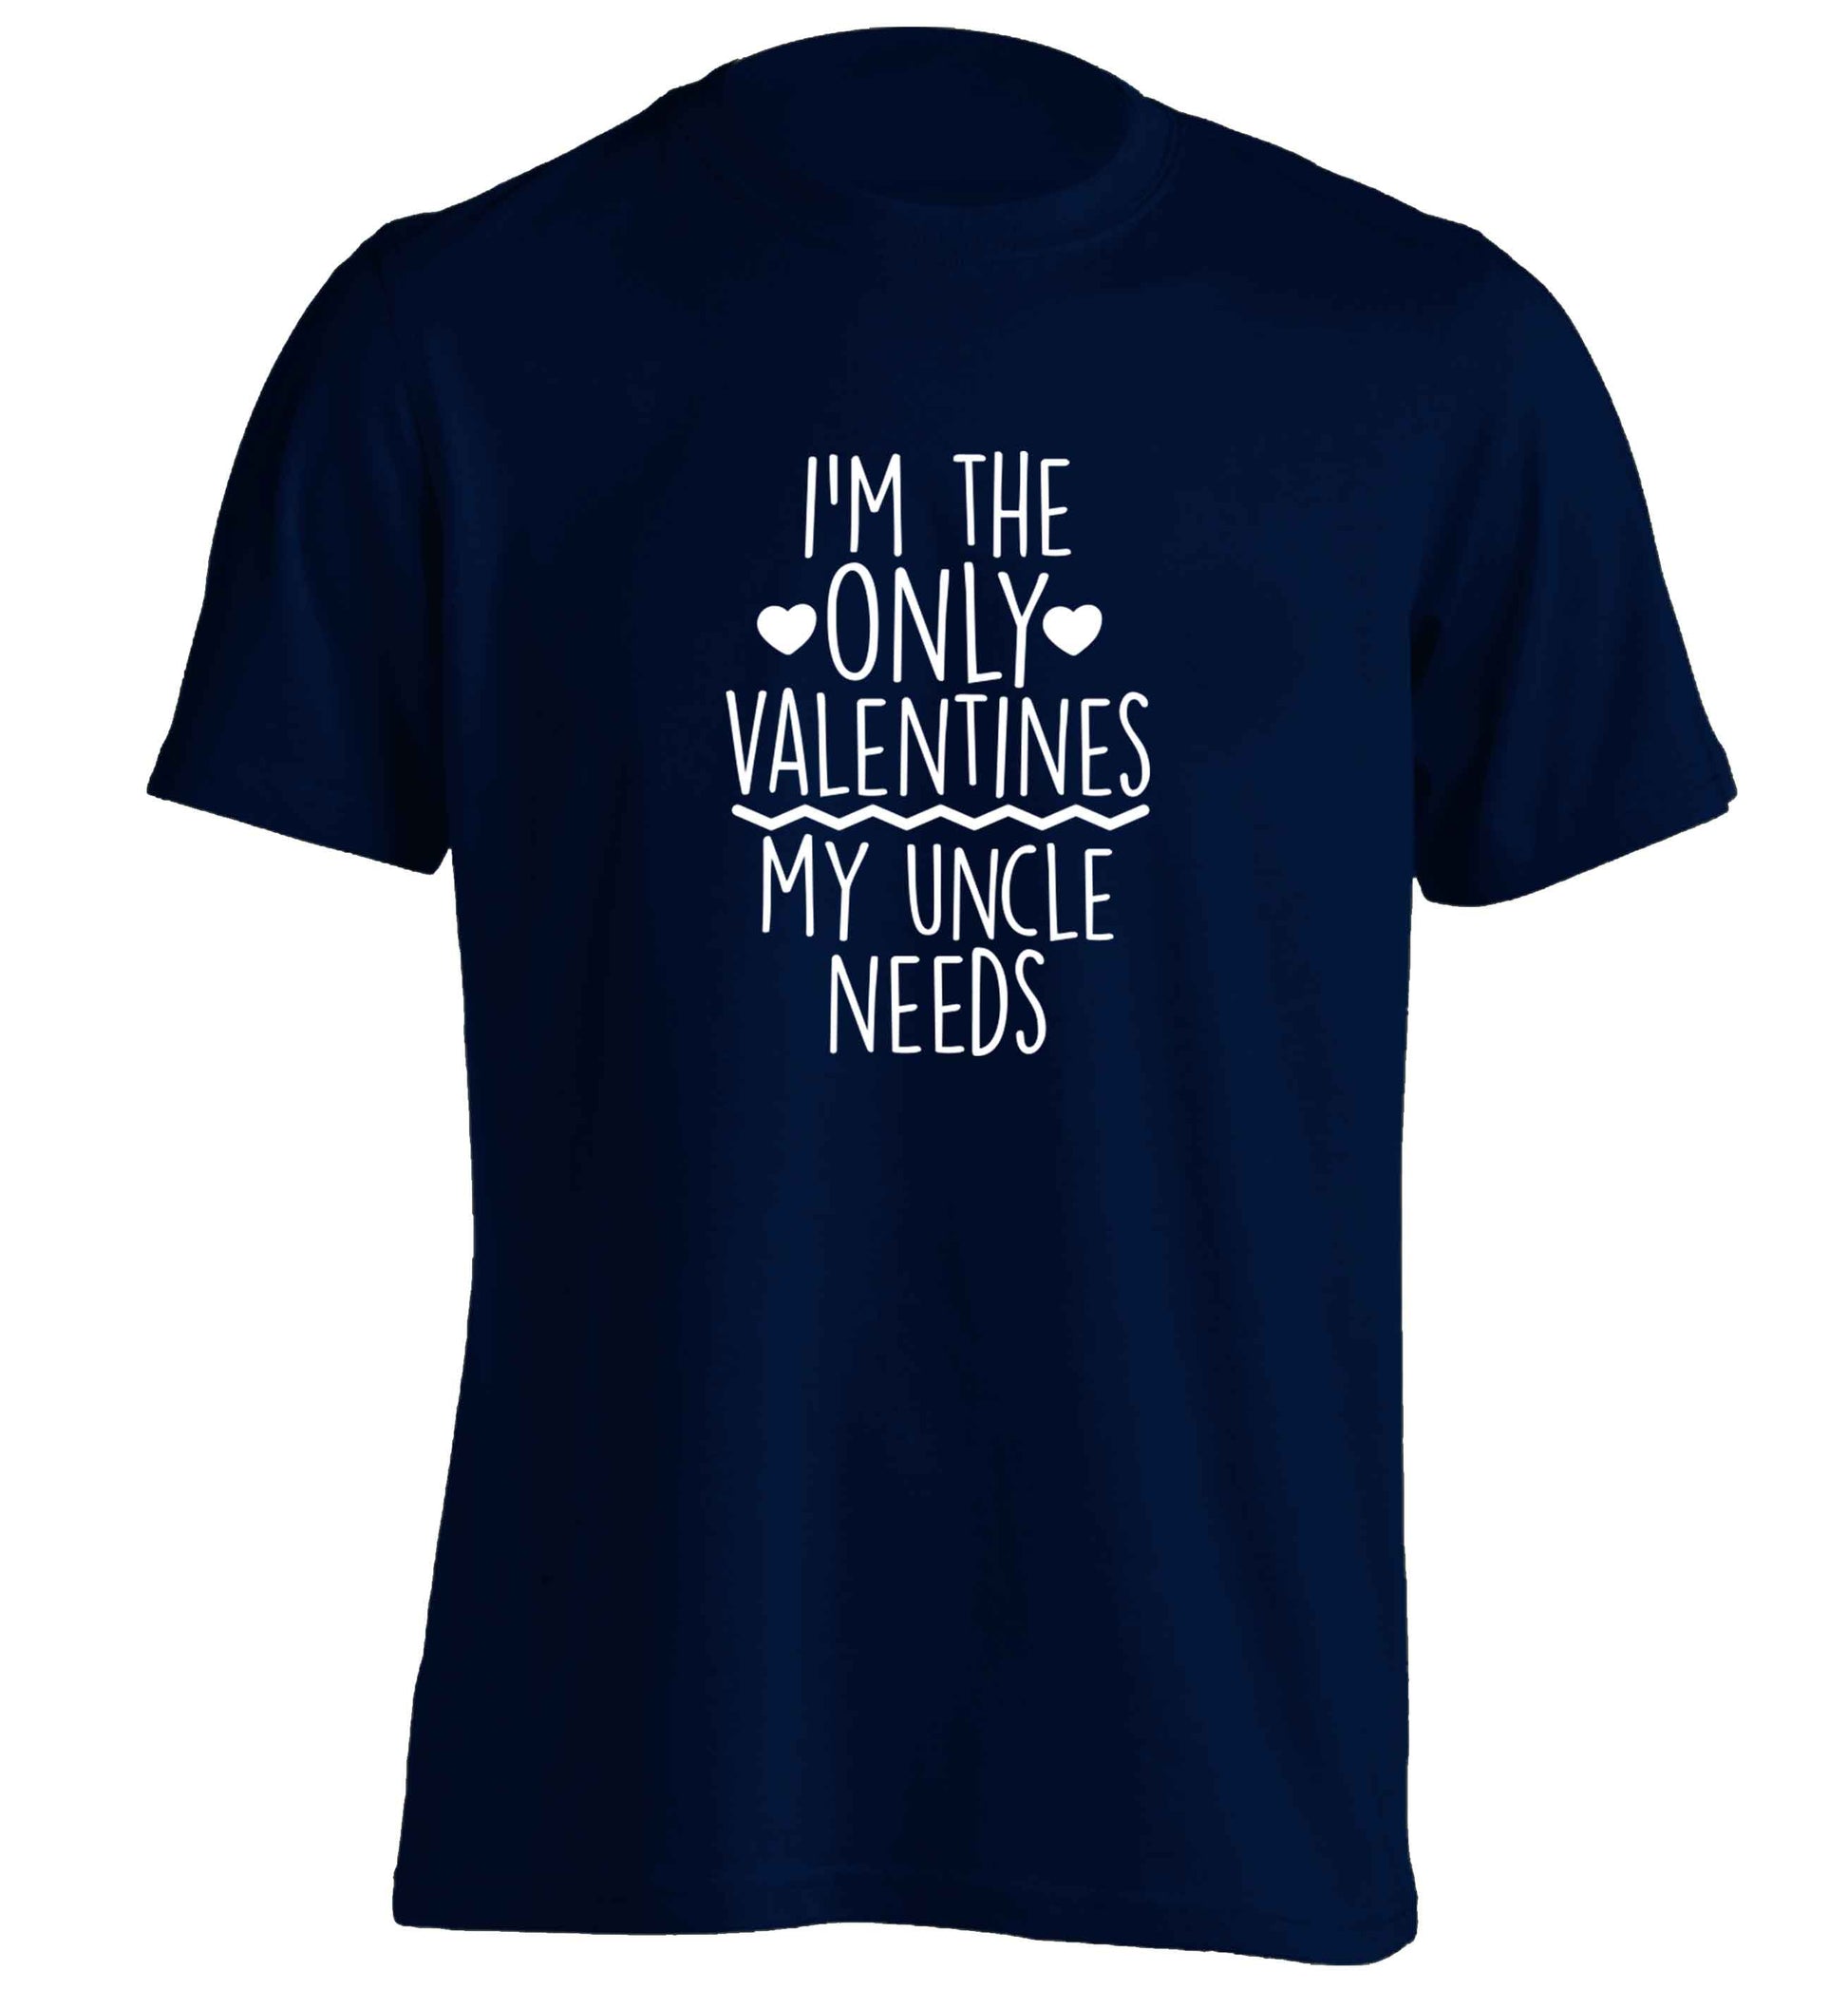 I'm the only valentines my uncle needs adults unisex navy Tshirt 2XL